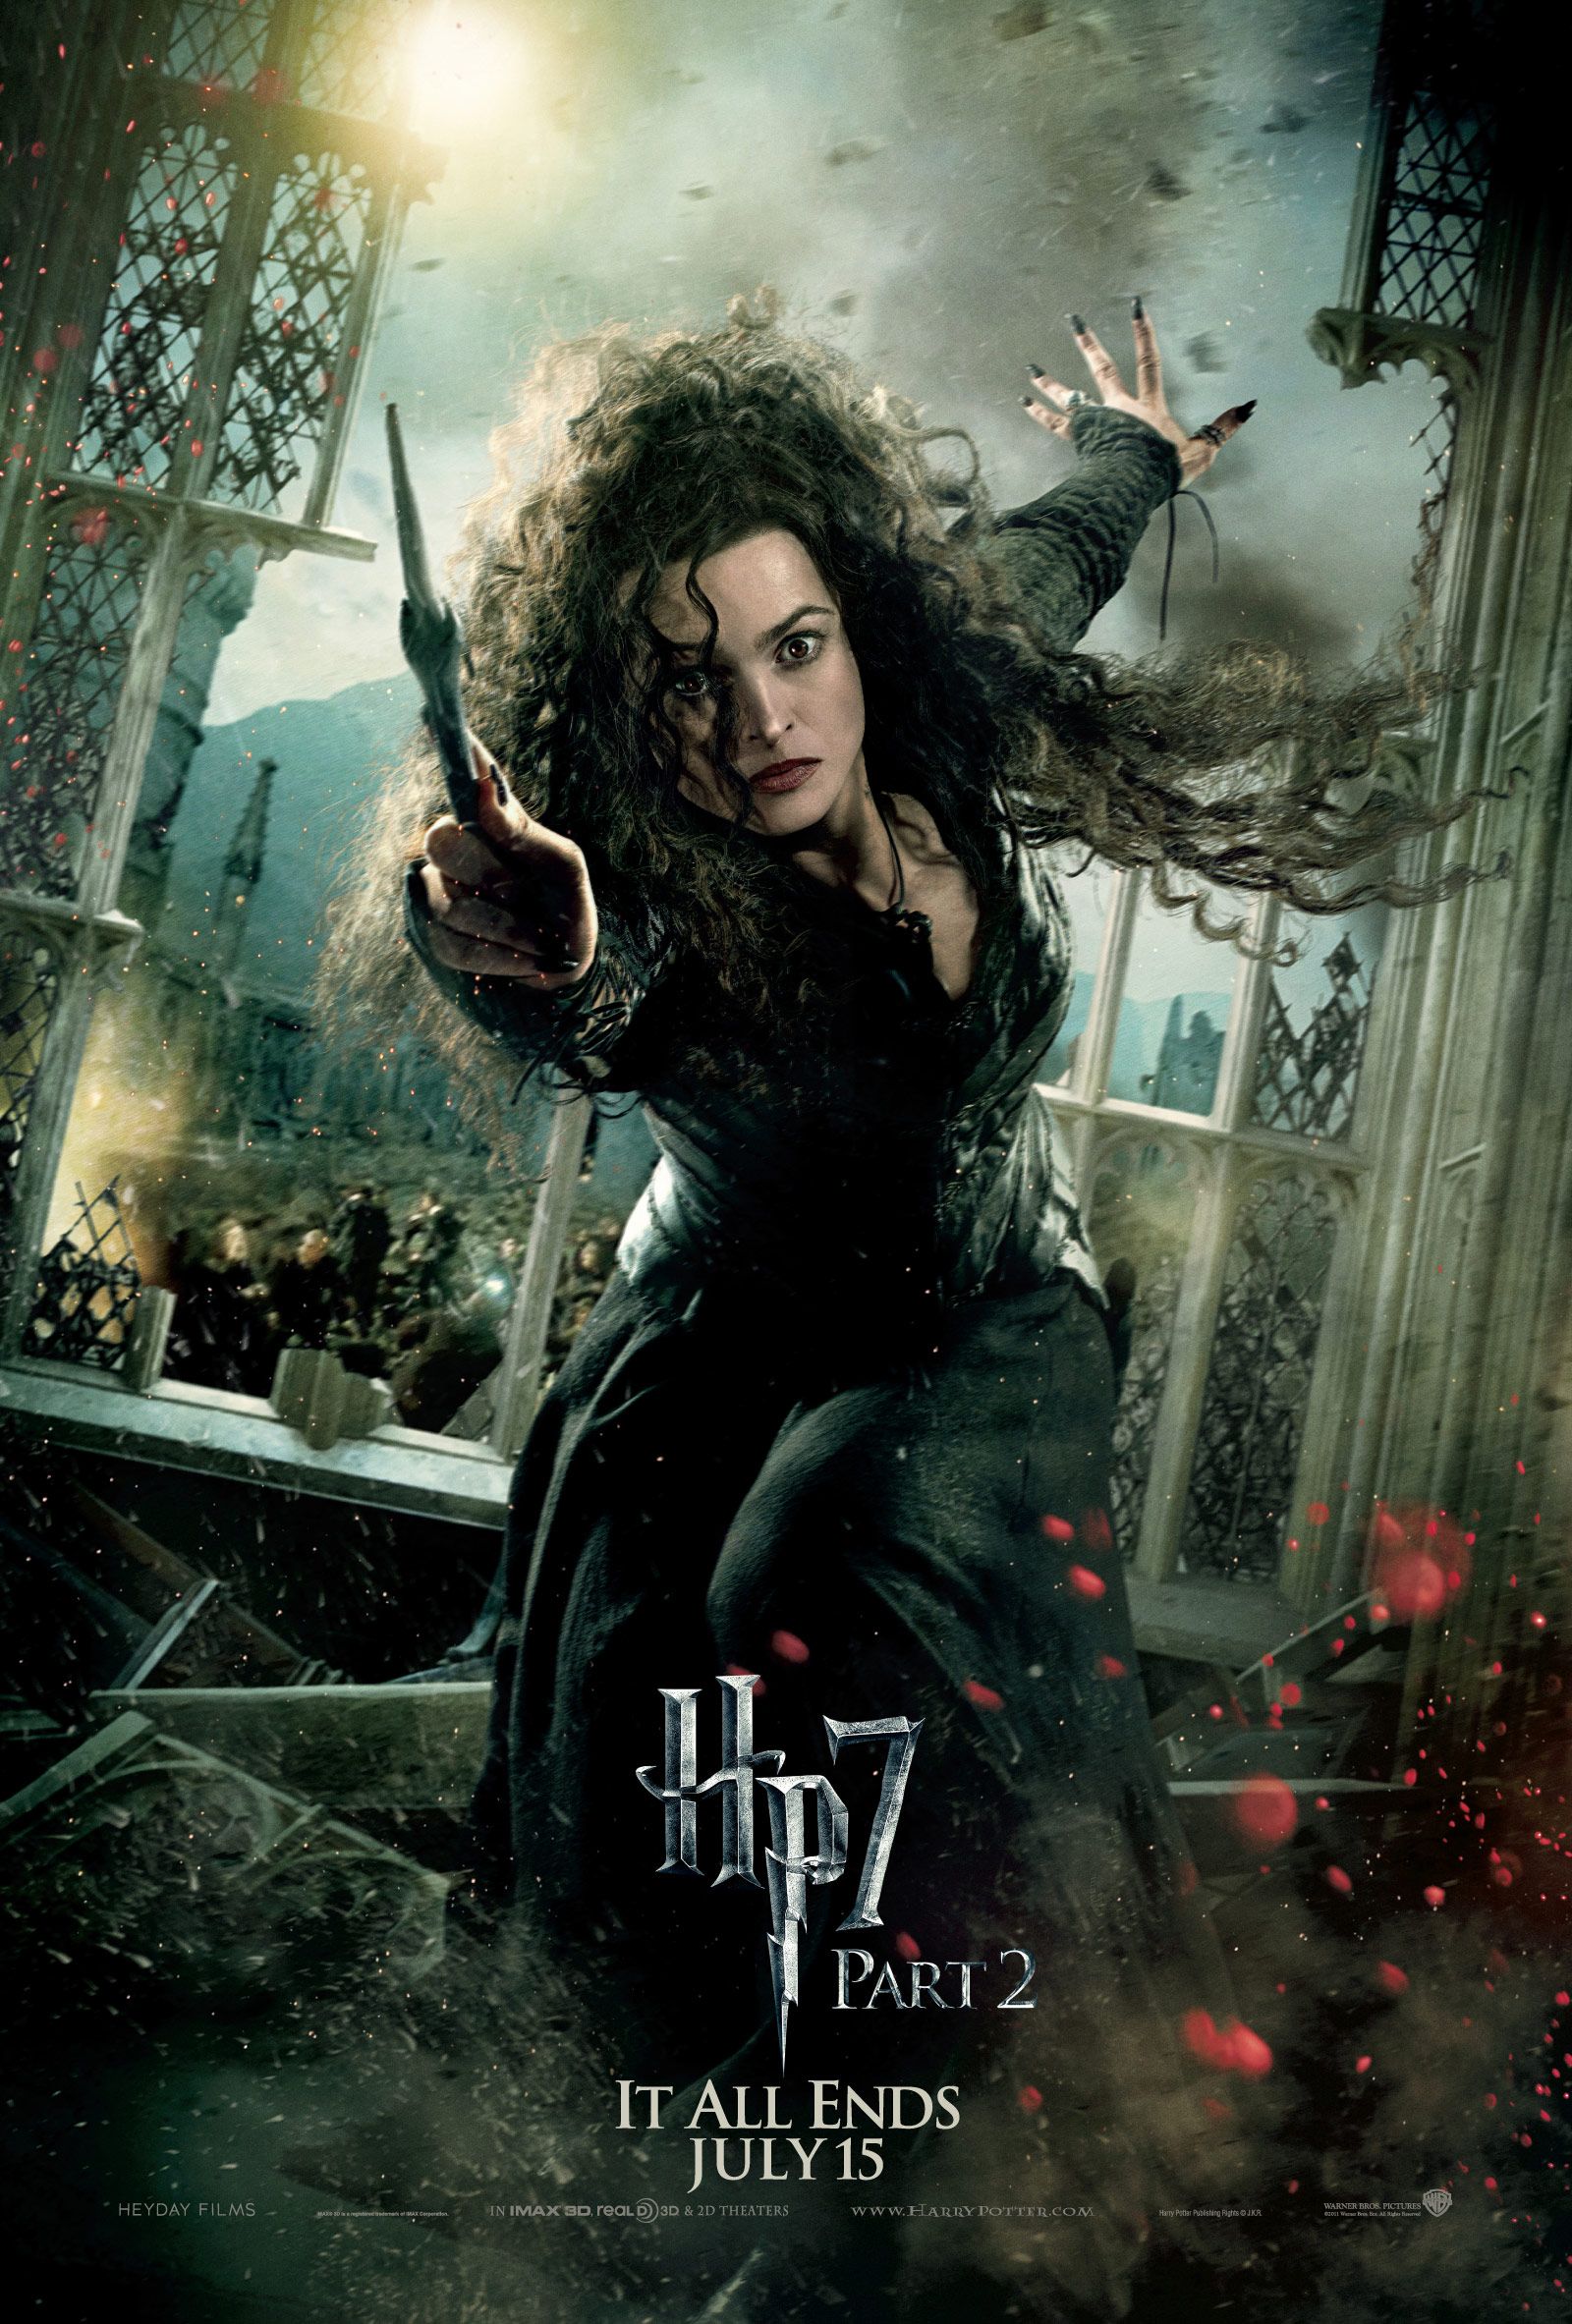 Harry Potter and the Deathly Hallows - Part 2 Beatrix Lestrange Character Poster